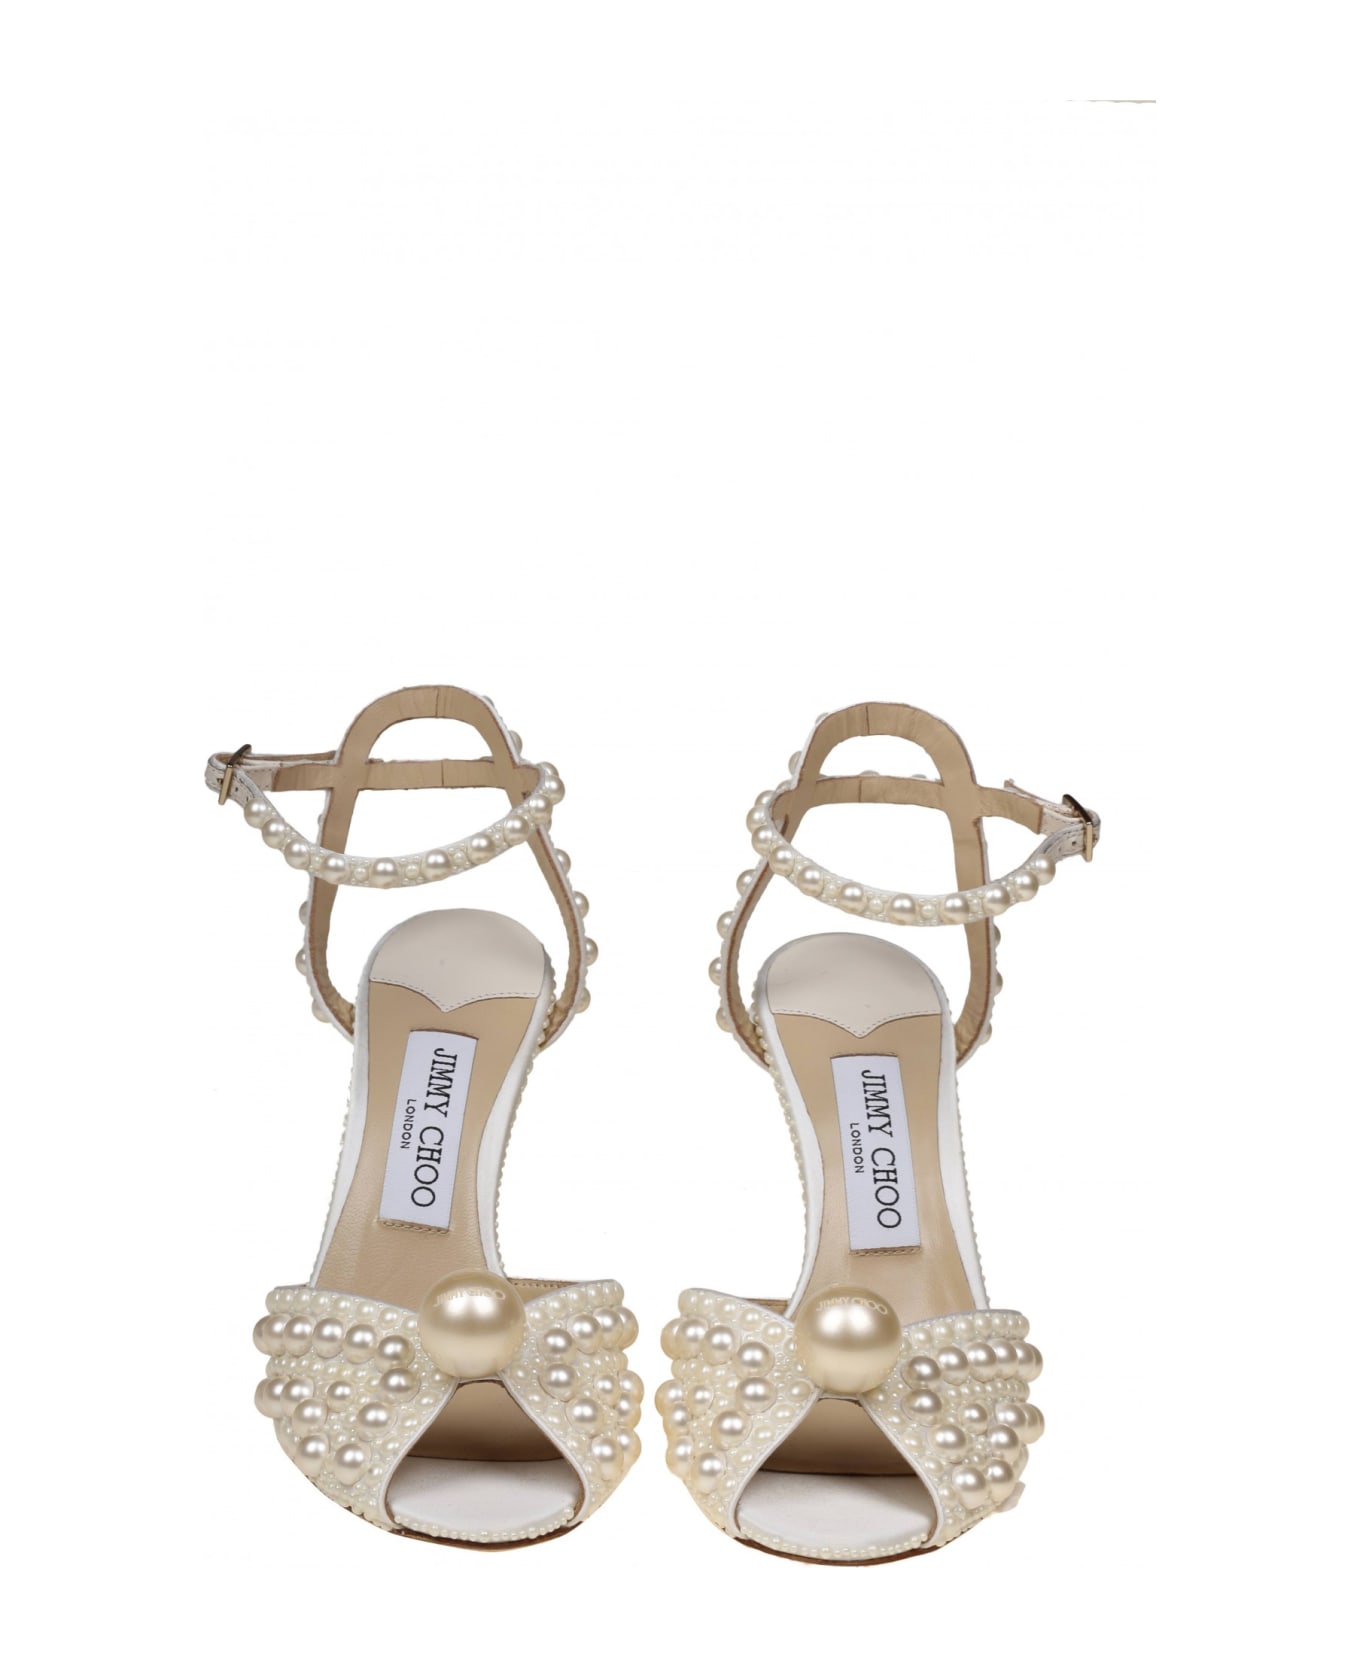 Jimmy Choo Sacoro Sandal In Satin With Applied Pearls - White/White